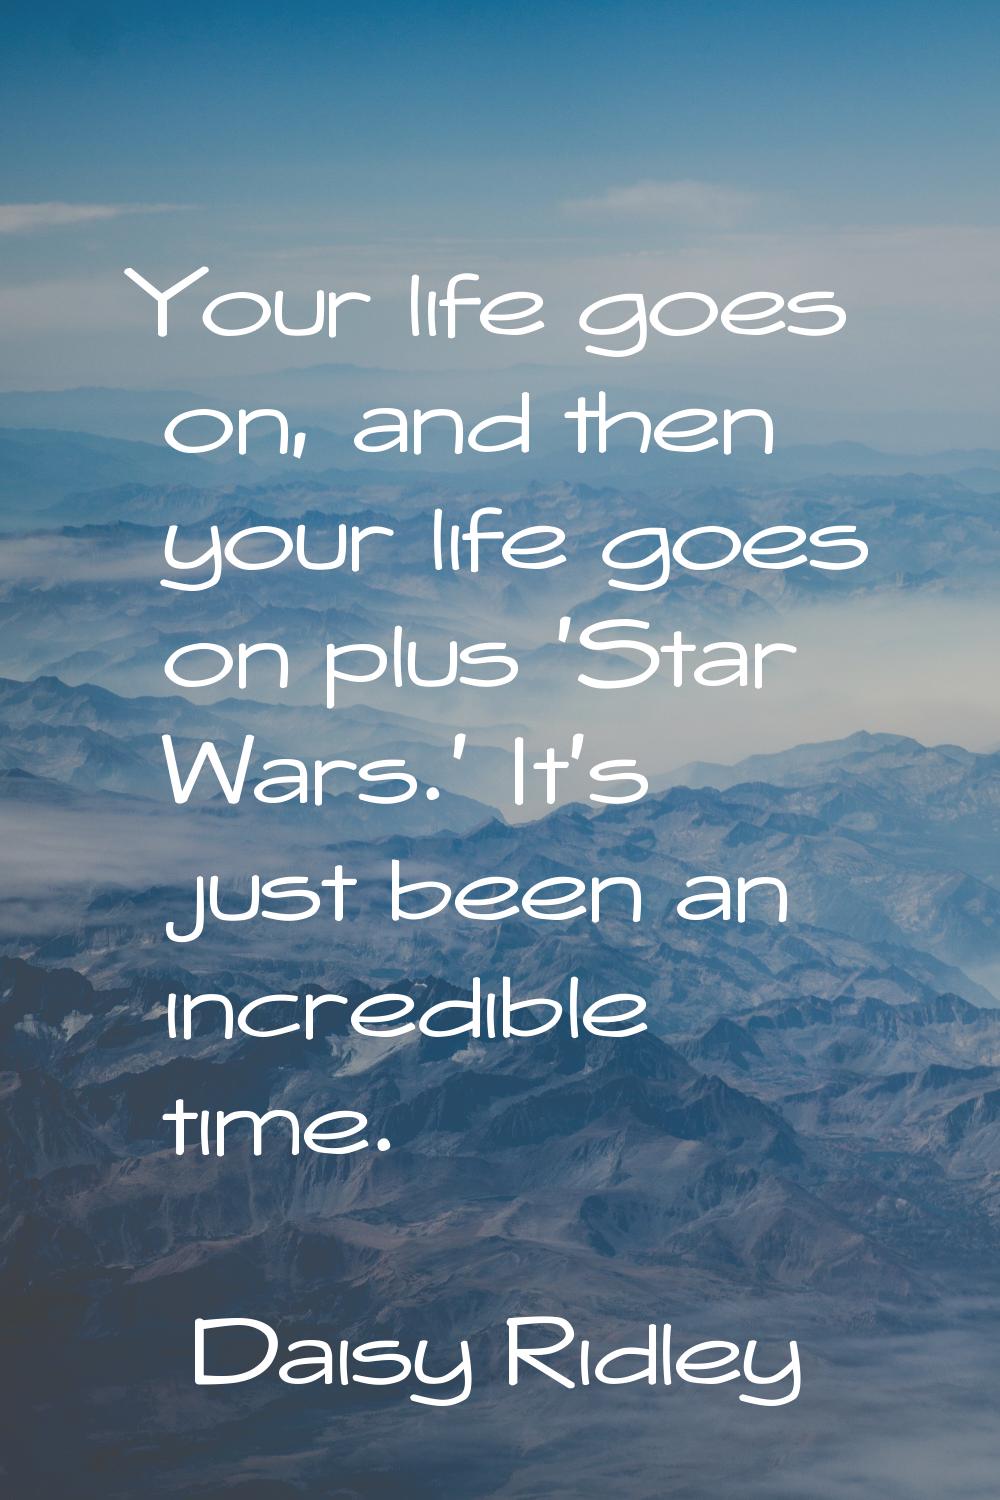 Your life goes on, and then your life goes on plus 'Star Wars.' It's just been an incredible time.